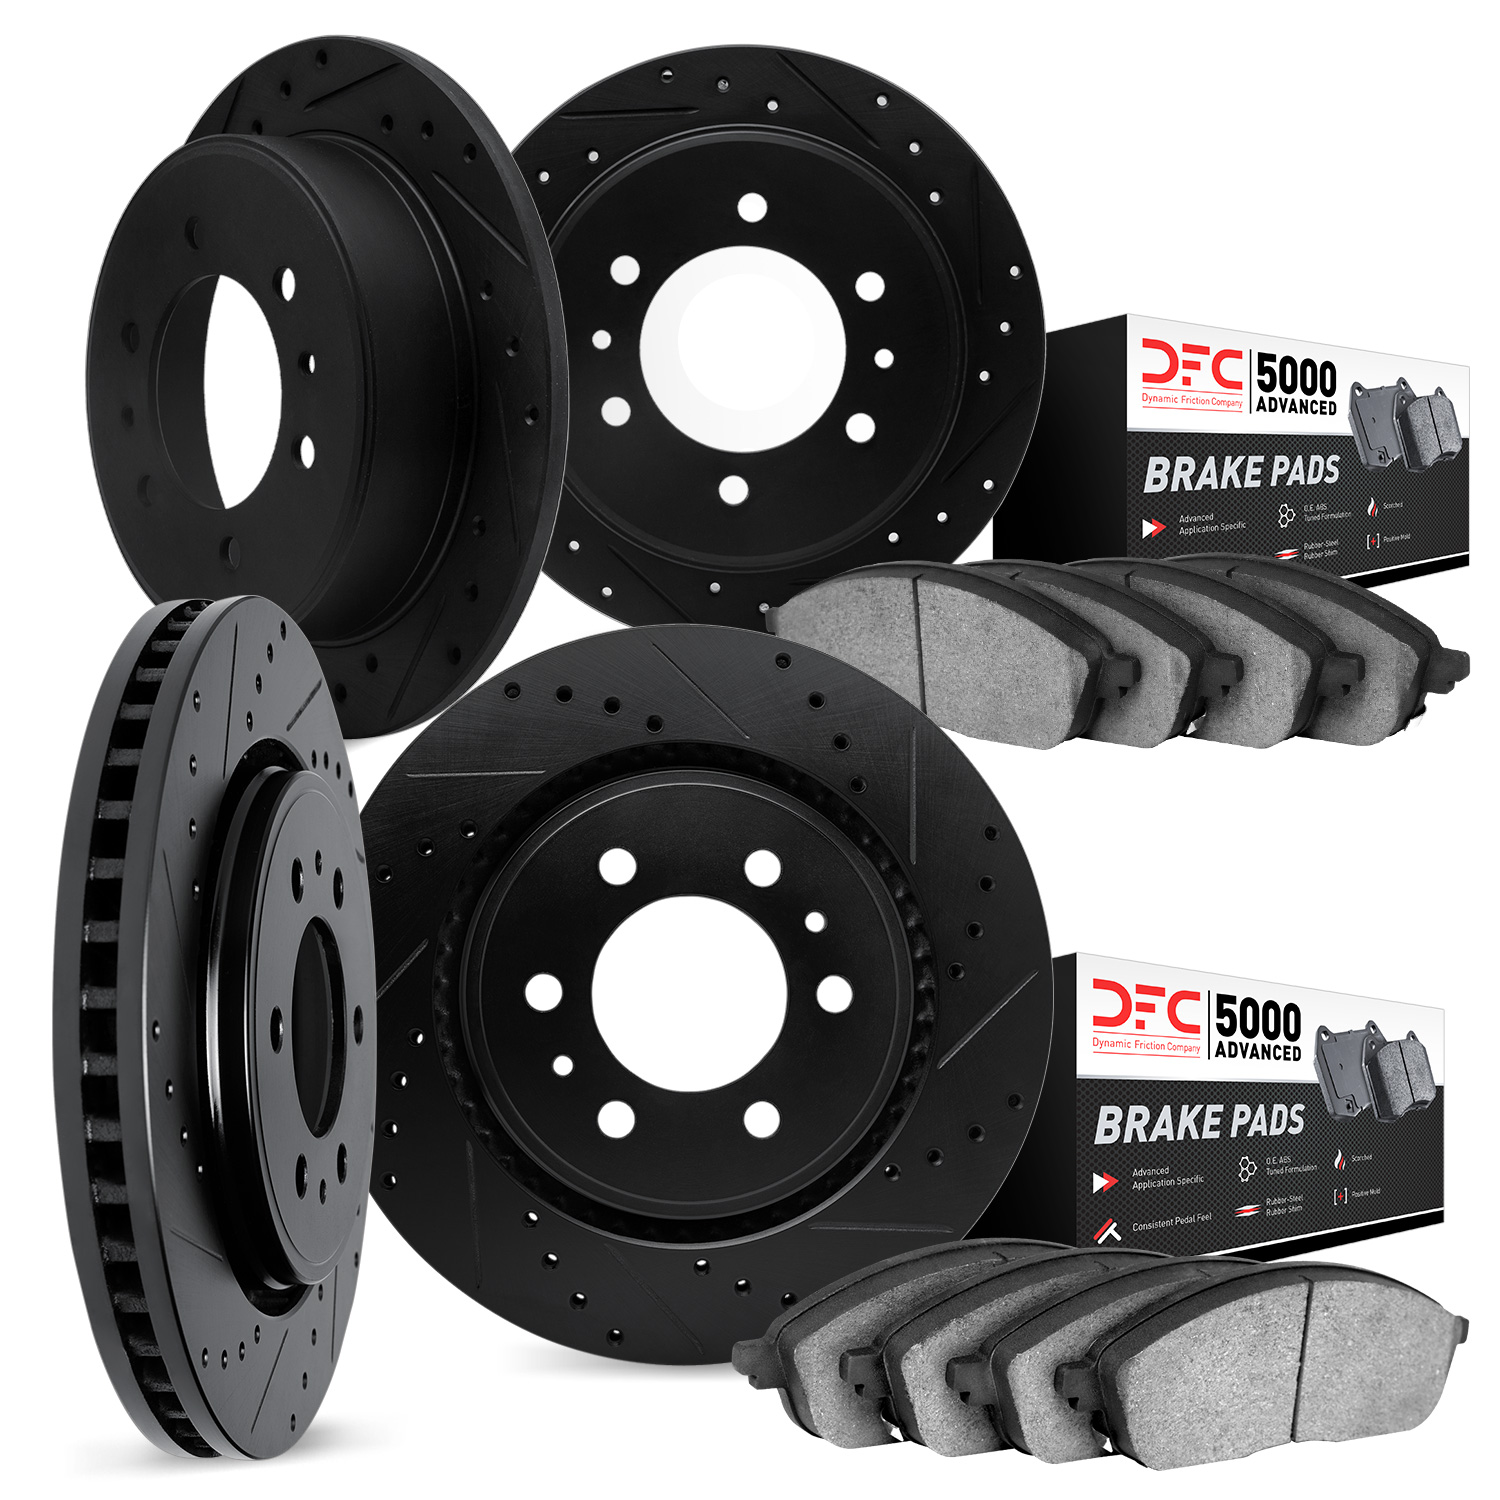 8504-67111 Drilled/Slotted Brake Rotors w/5000 Advanced Brake Pads Kit [Black], 2005-2007 Infiniti/Nissan, Position: Front and R